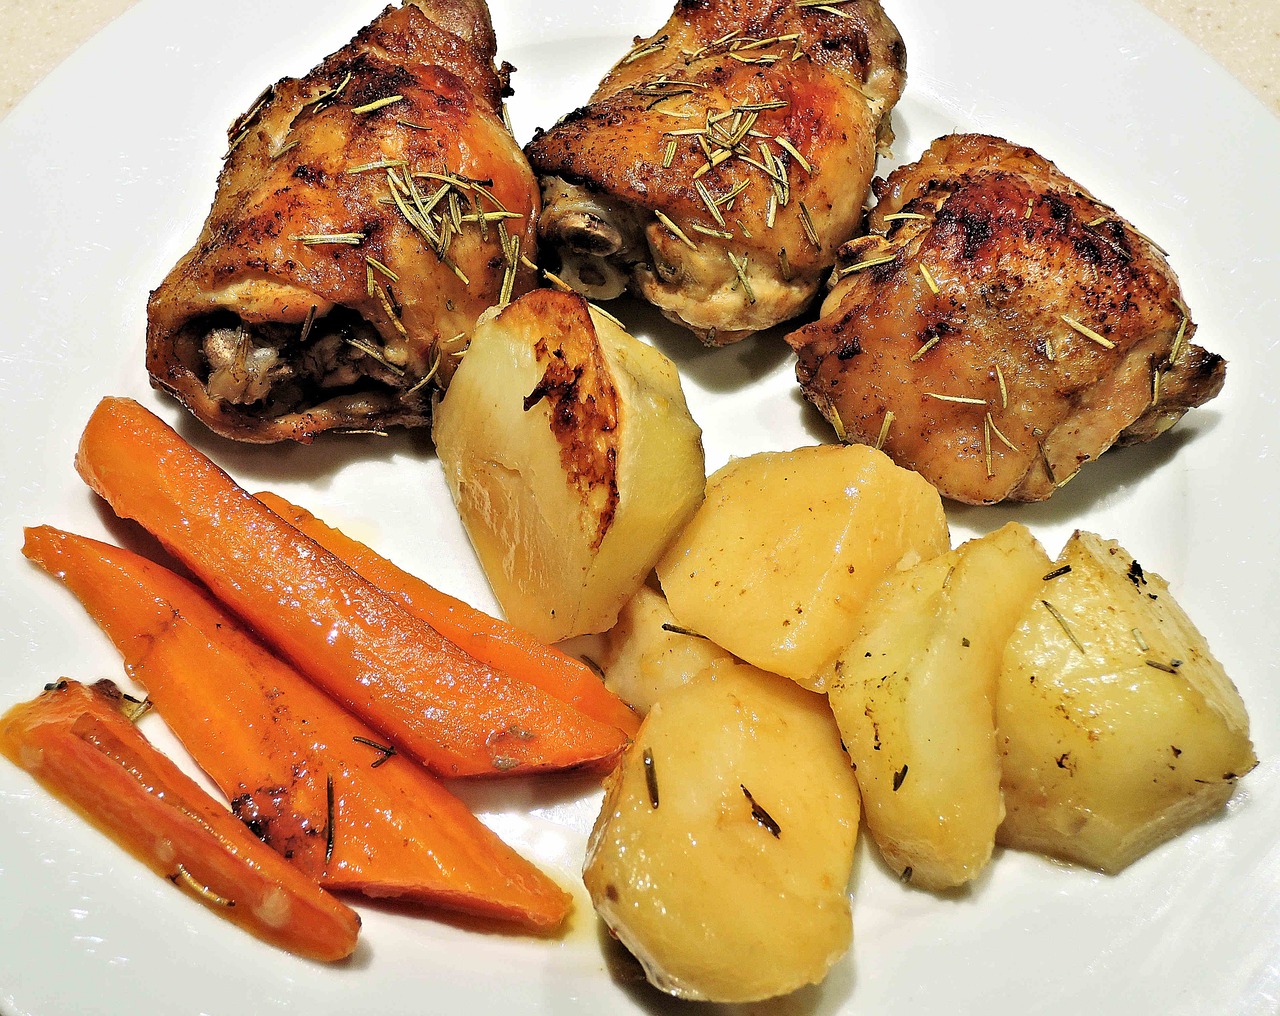 Rachael Ray's Garlic Roasted Chicken With Rosemary and Lemon